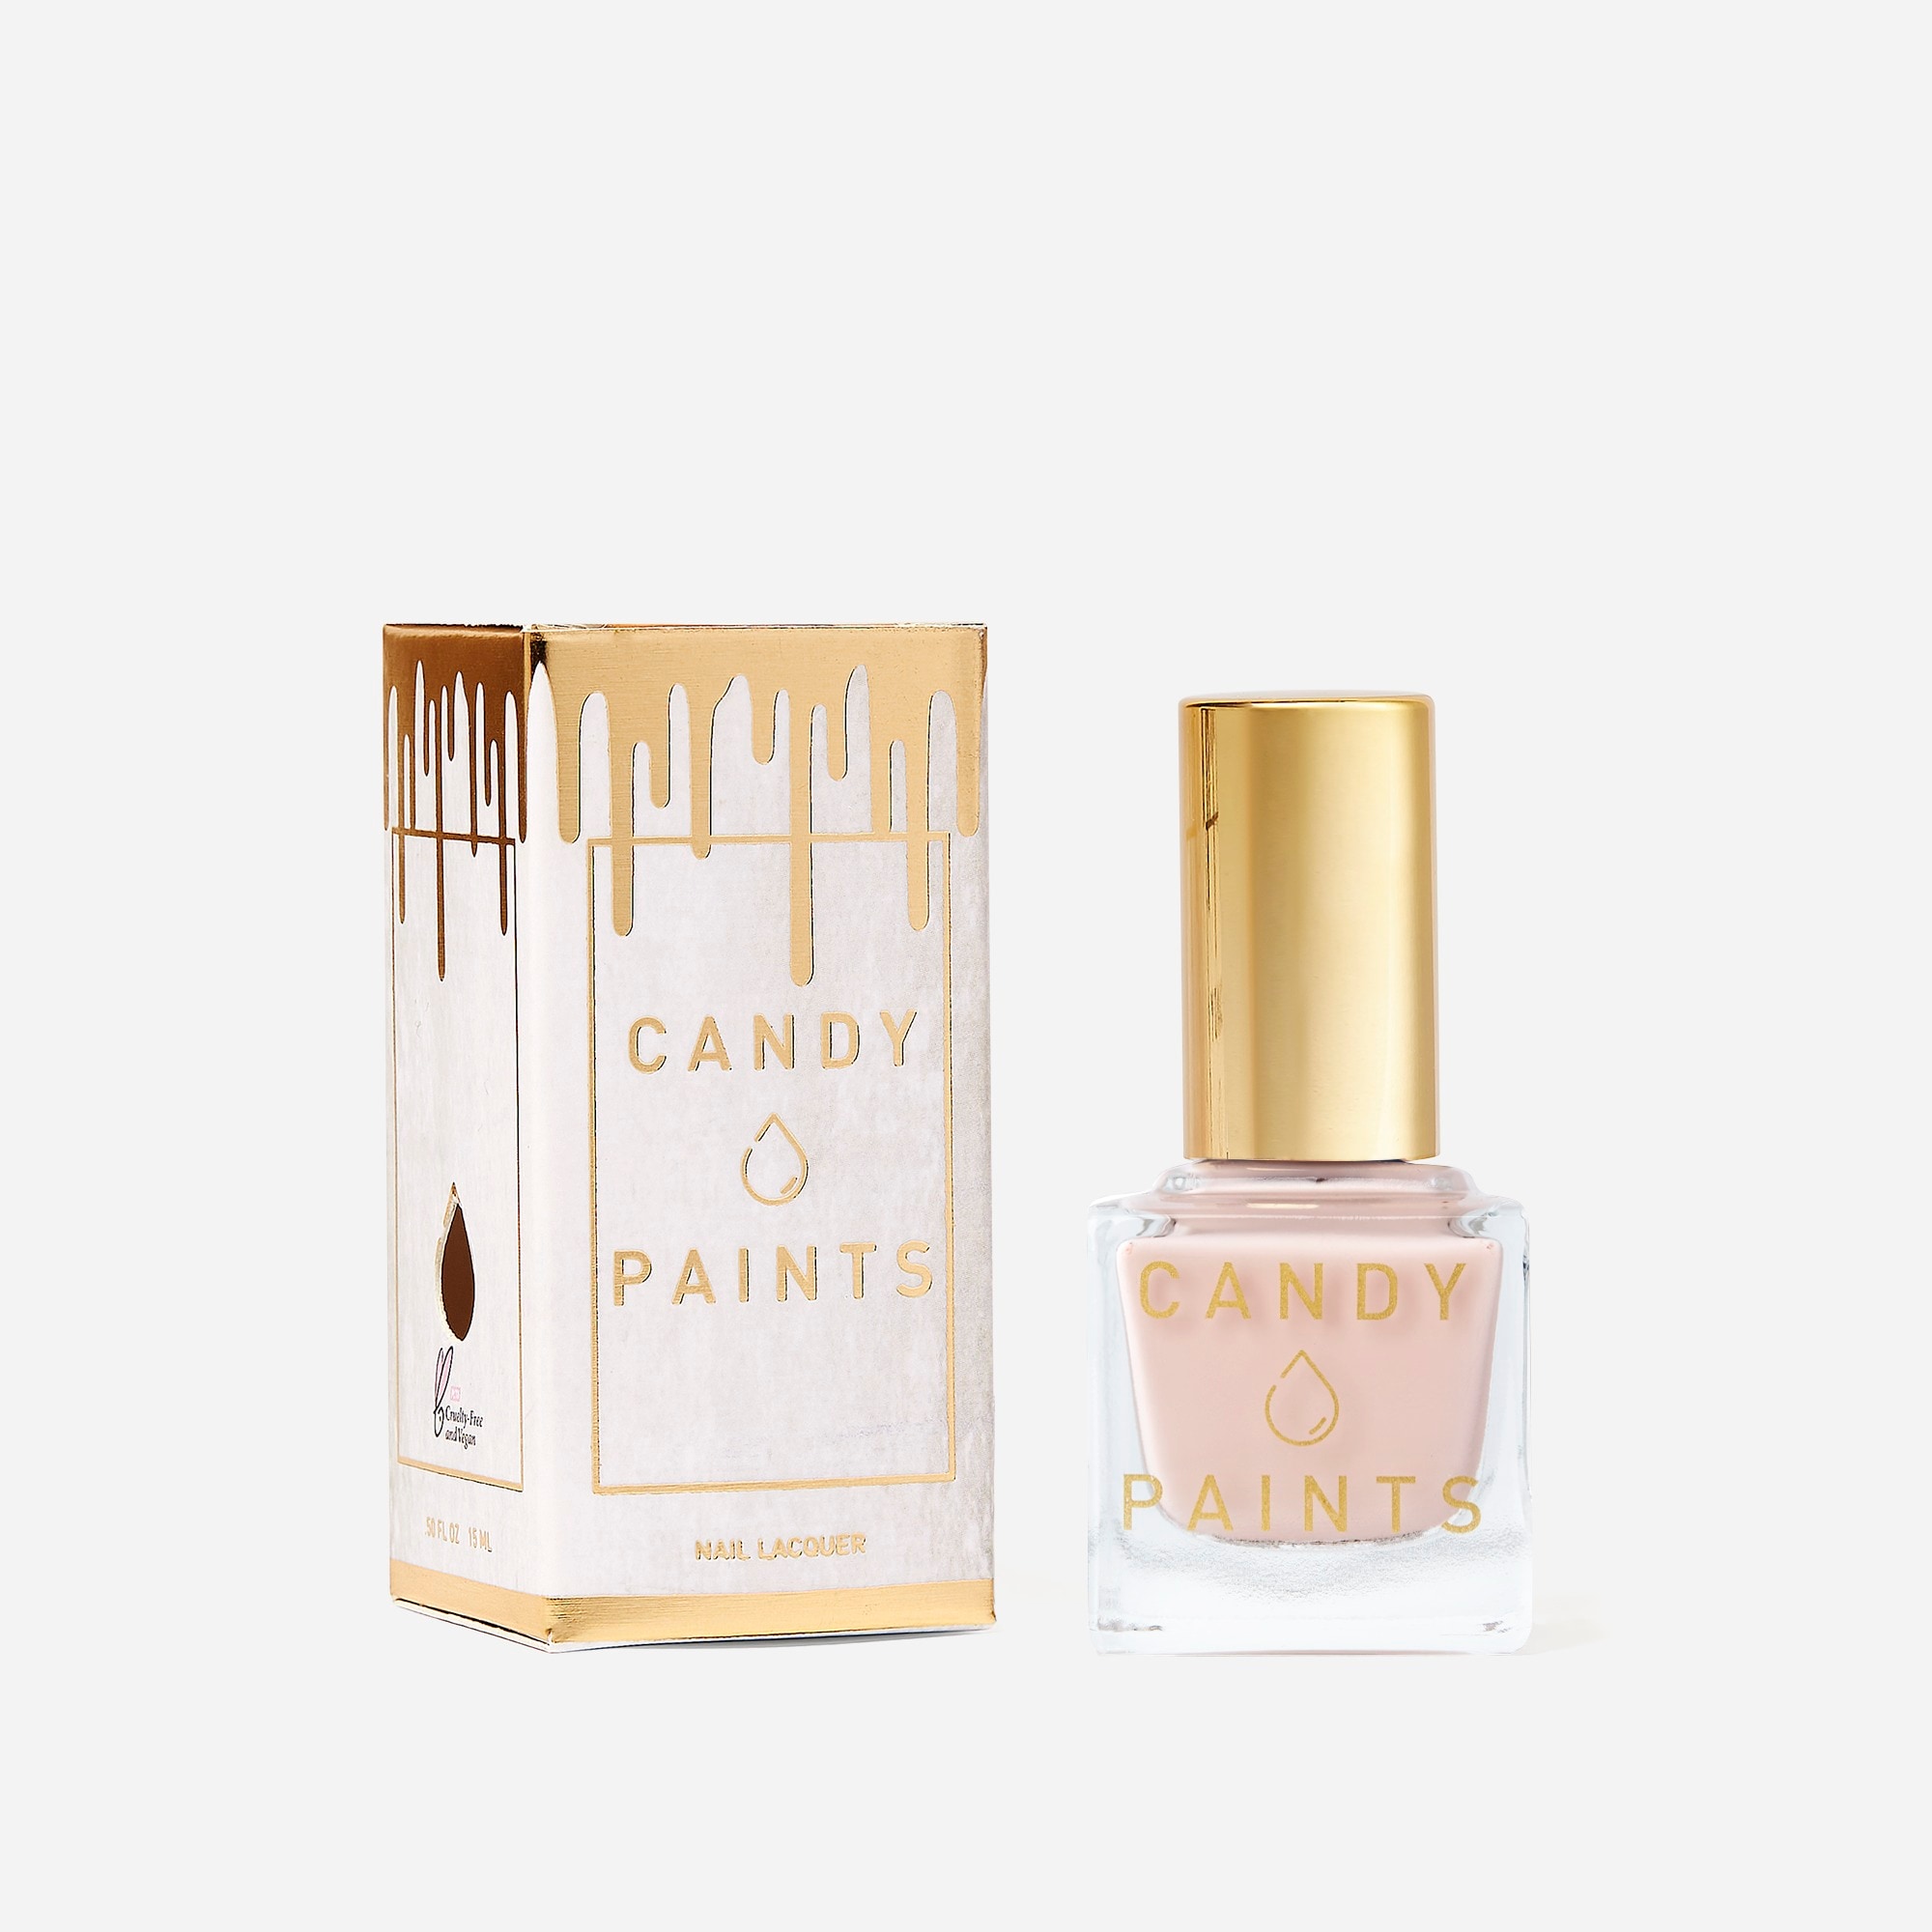  CANDY X PAINTS A Nude Mirage nail lacquer